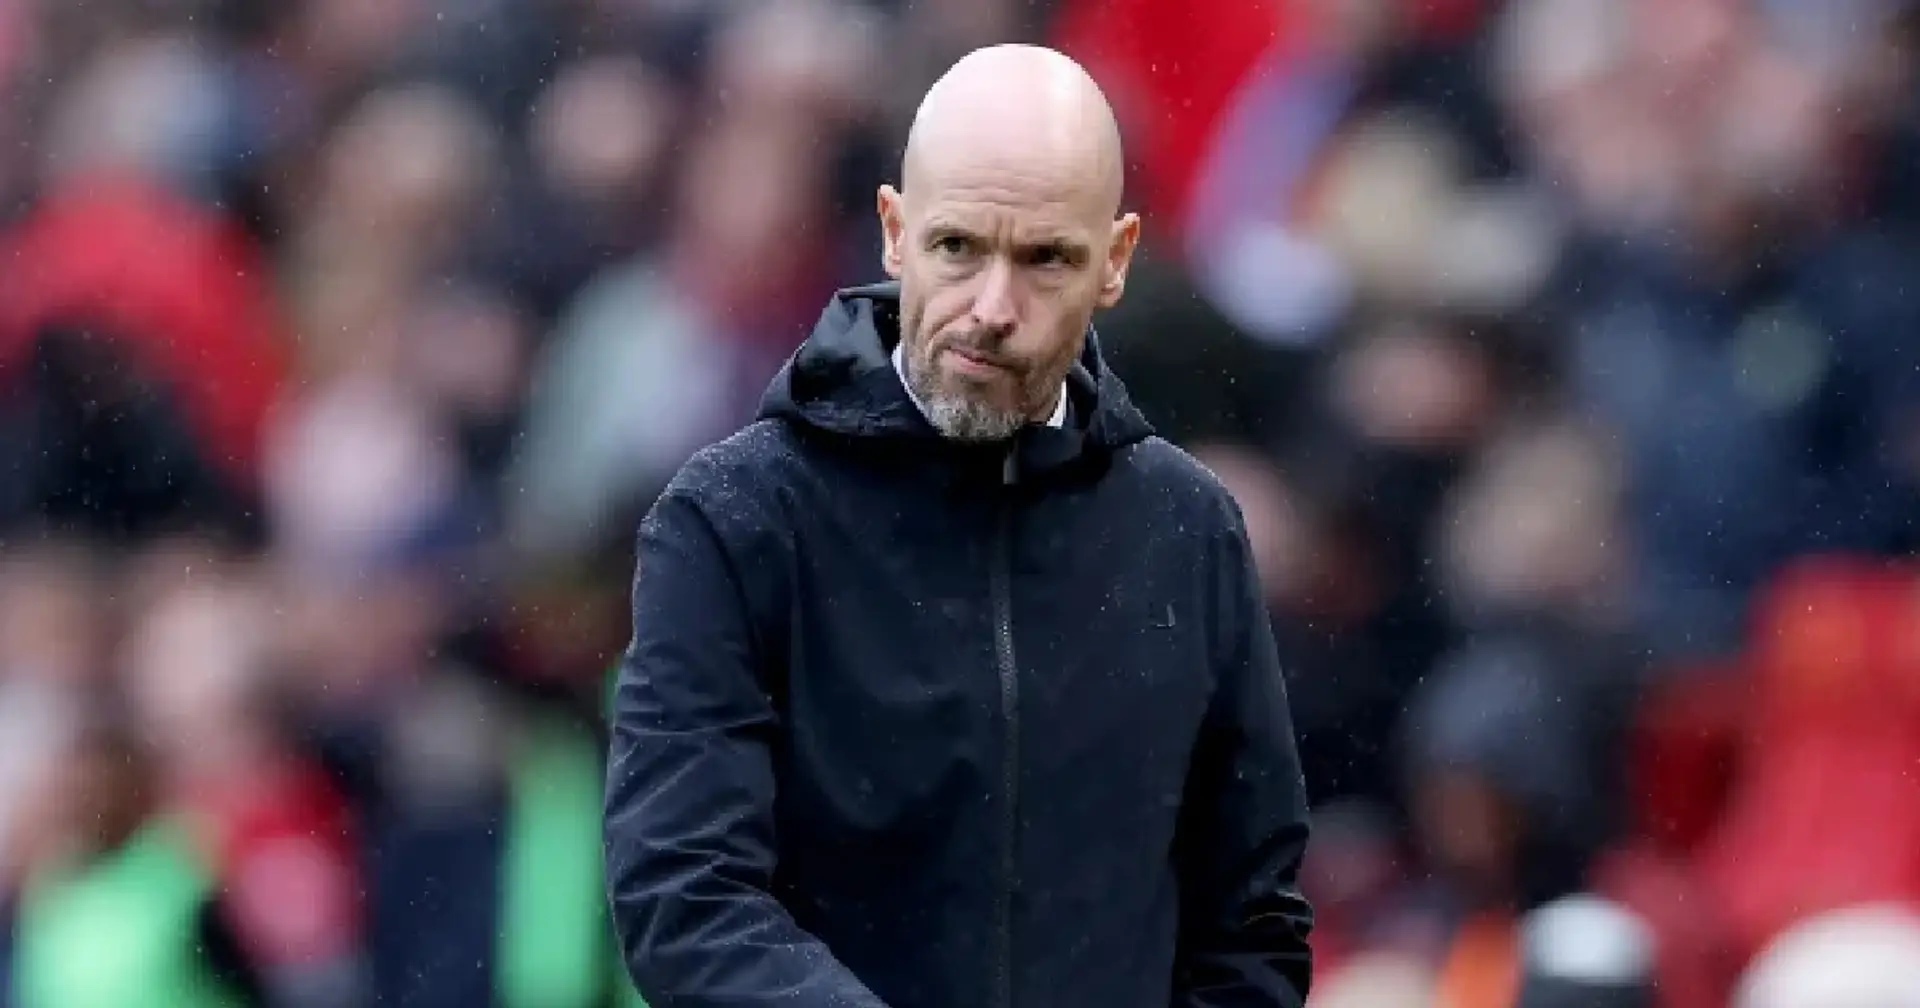 Ten Hag to Man United fans: 'You have to be patient' 